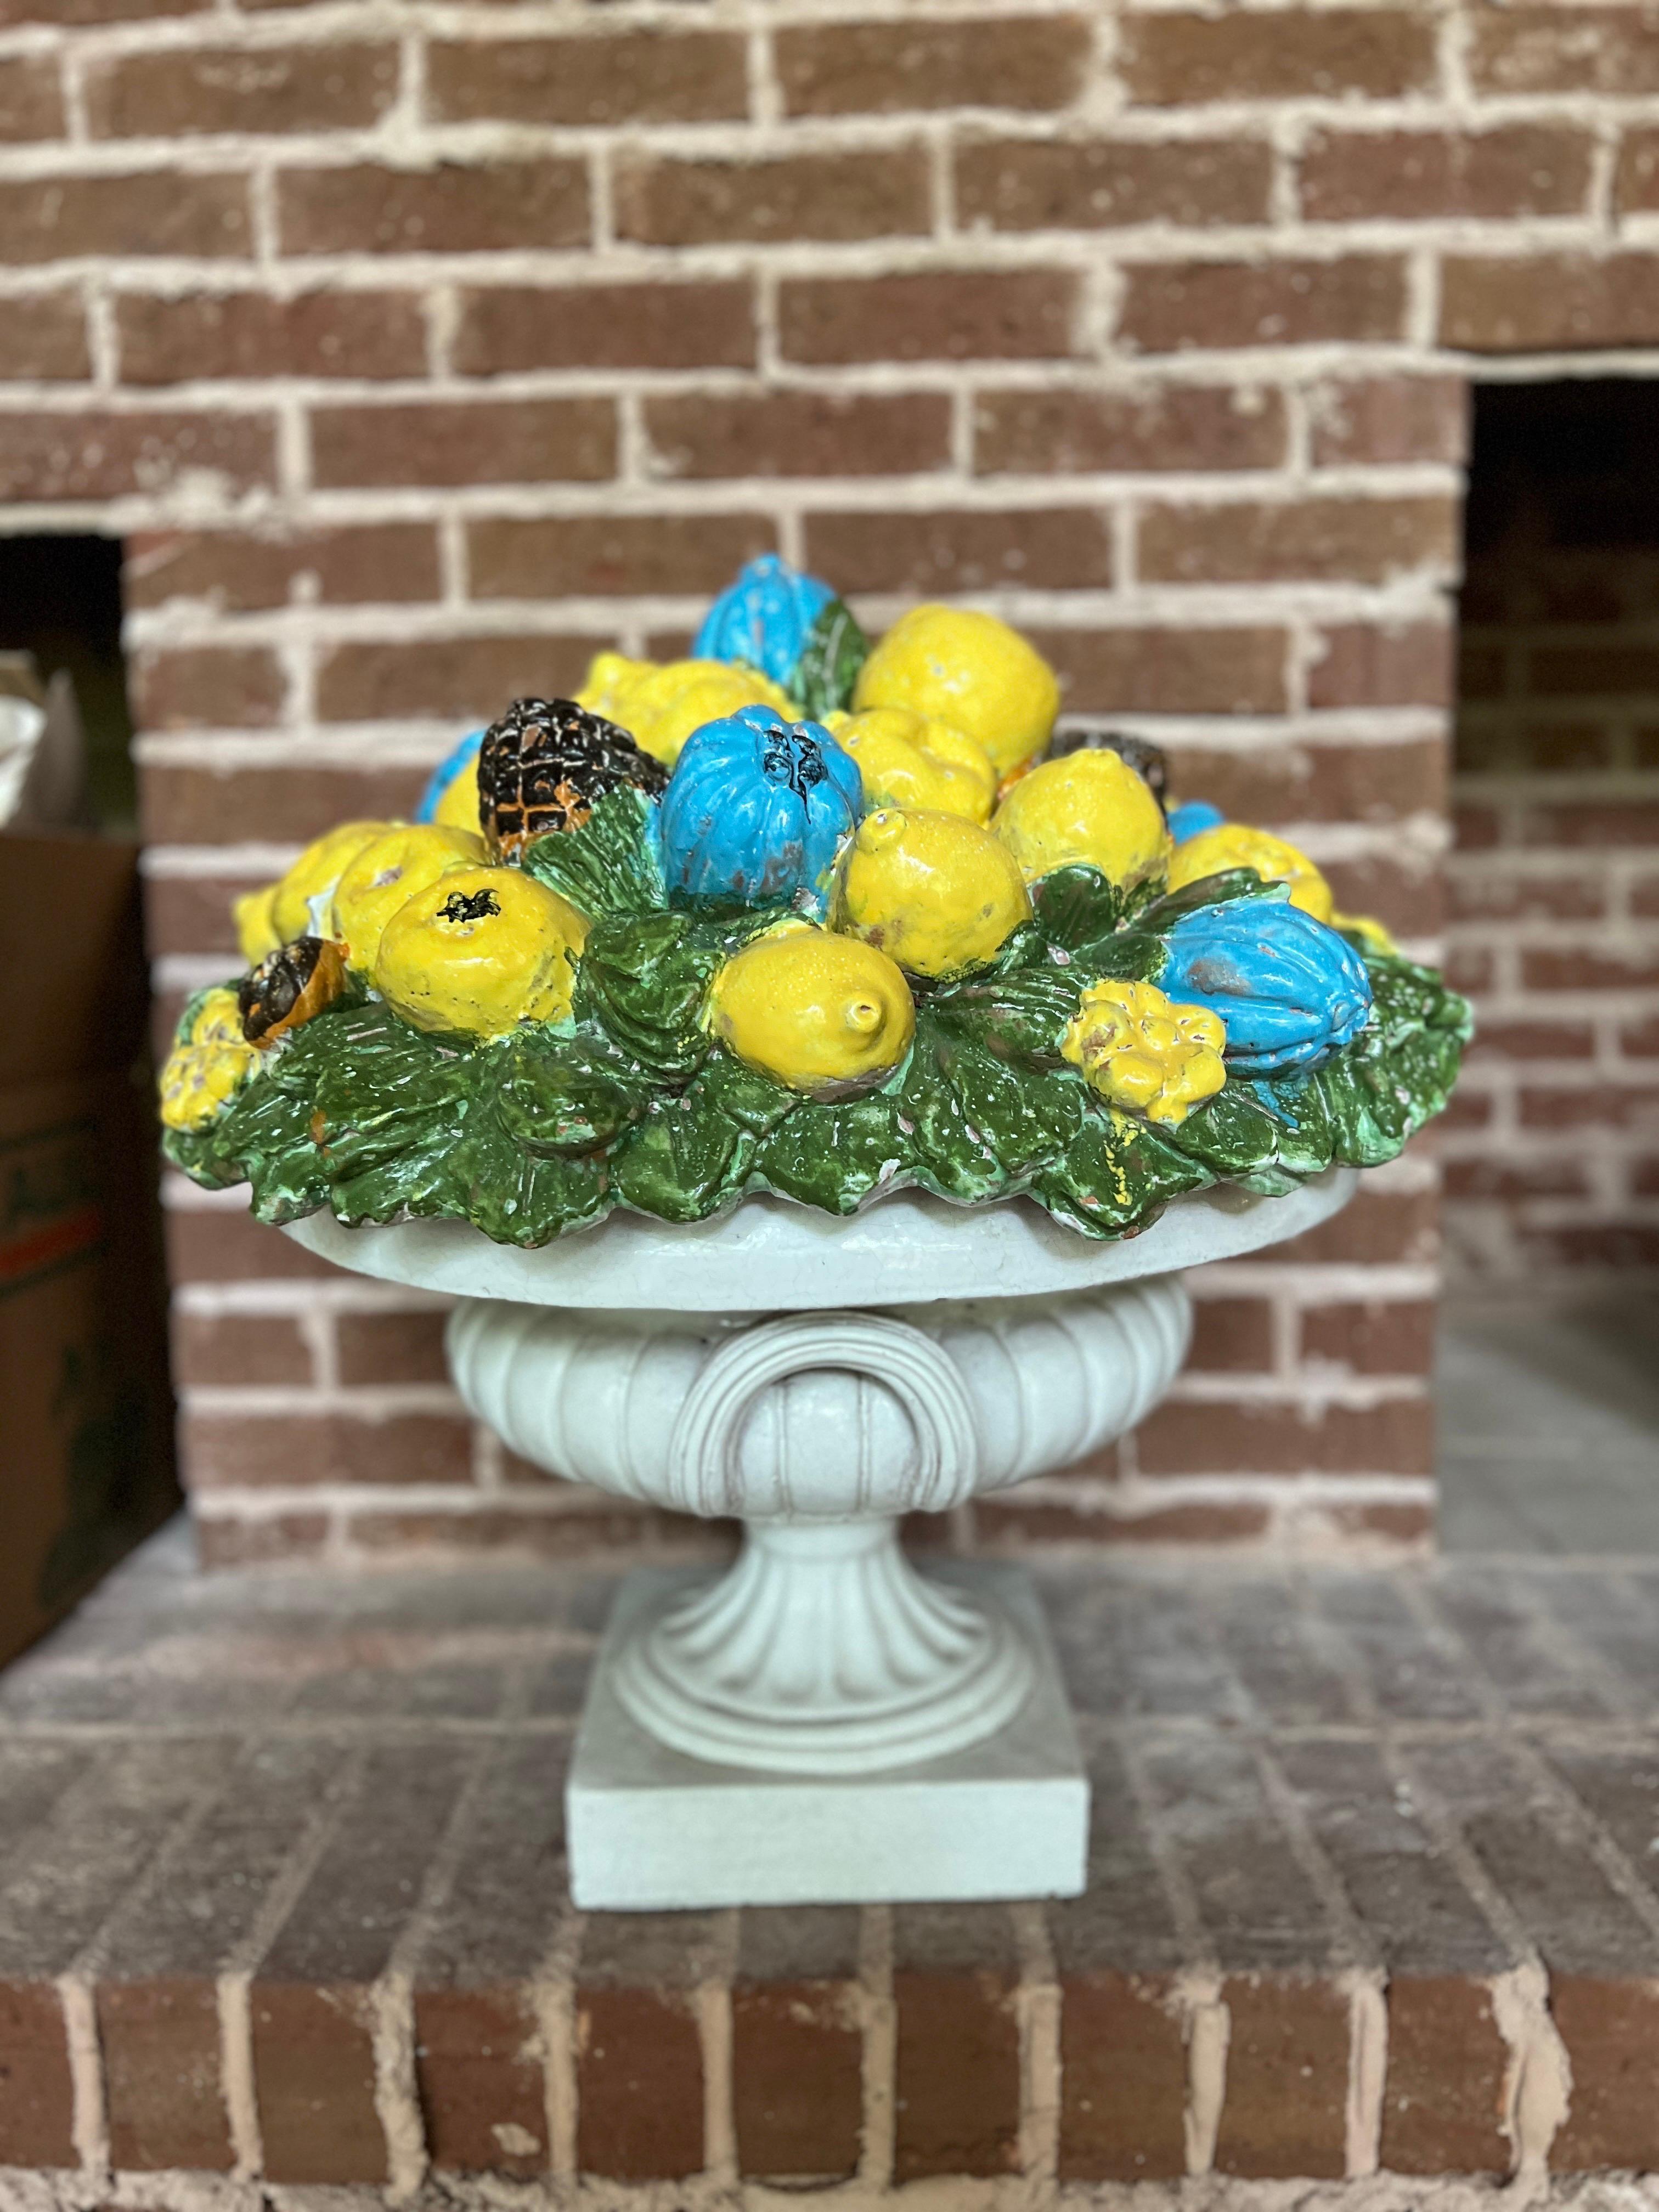 Italian, 20th century.

A very large and good quality Italian delarobia style pottery urn. The centerpiece features a two-part construction with a neoclassical two handled urn and topped with a stunning tri-color top filled with leaves, lemons,